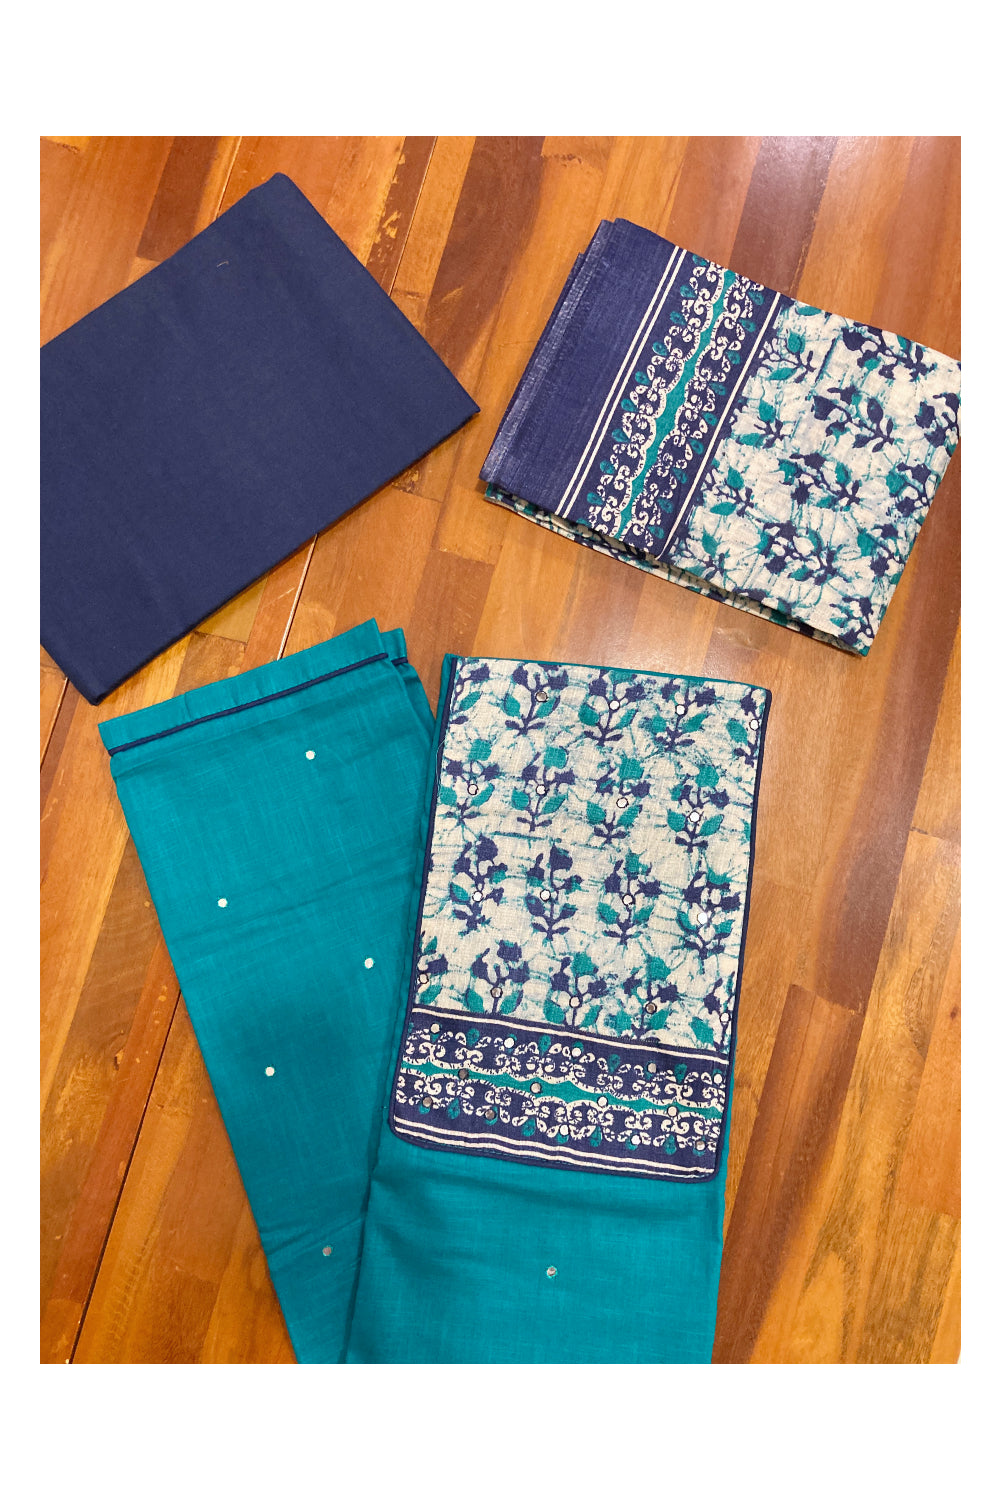 Southloom™ Cotton Churidar Salwar Suit Material in Teal Green and Printed Mirror Work on Yoke Portion